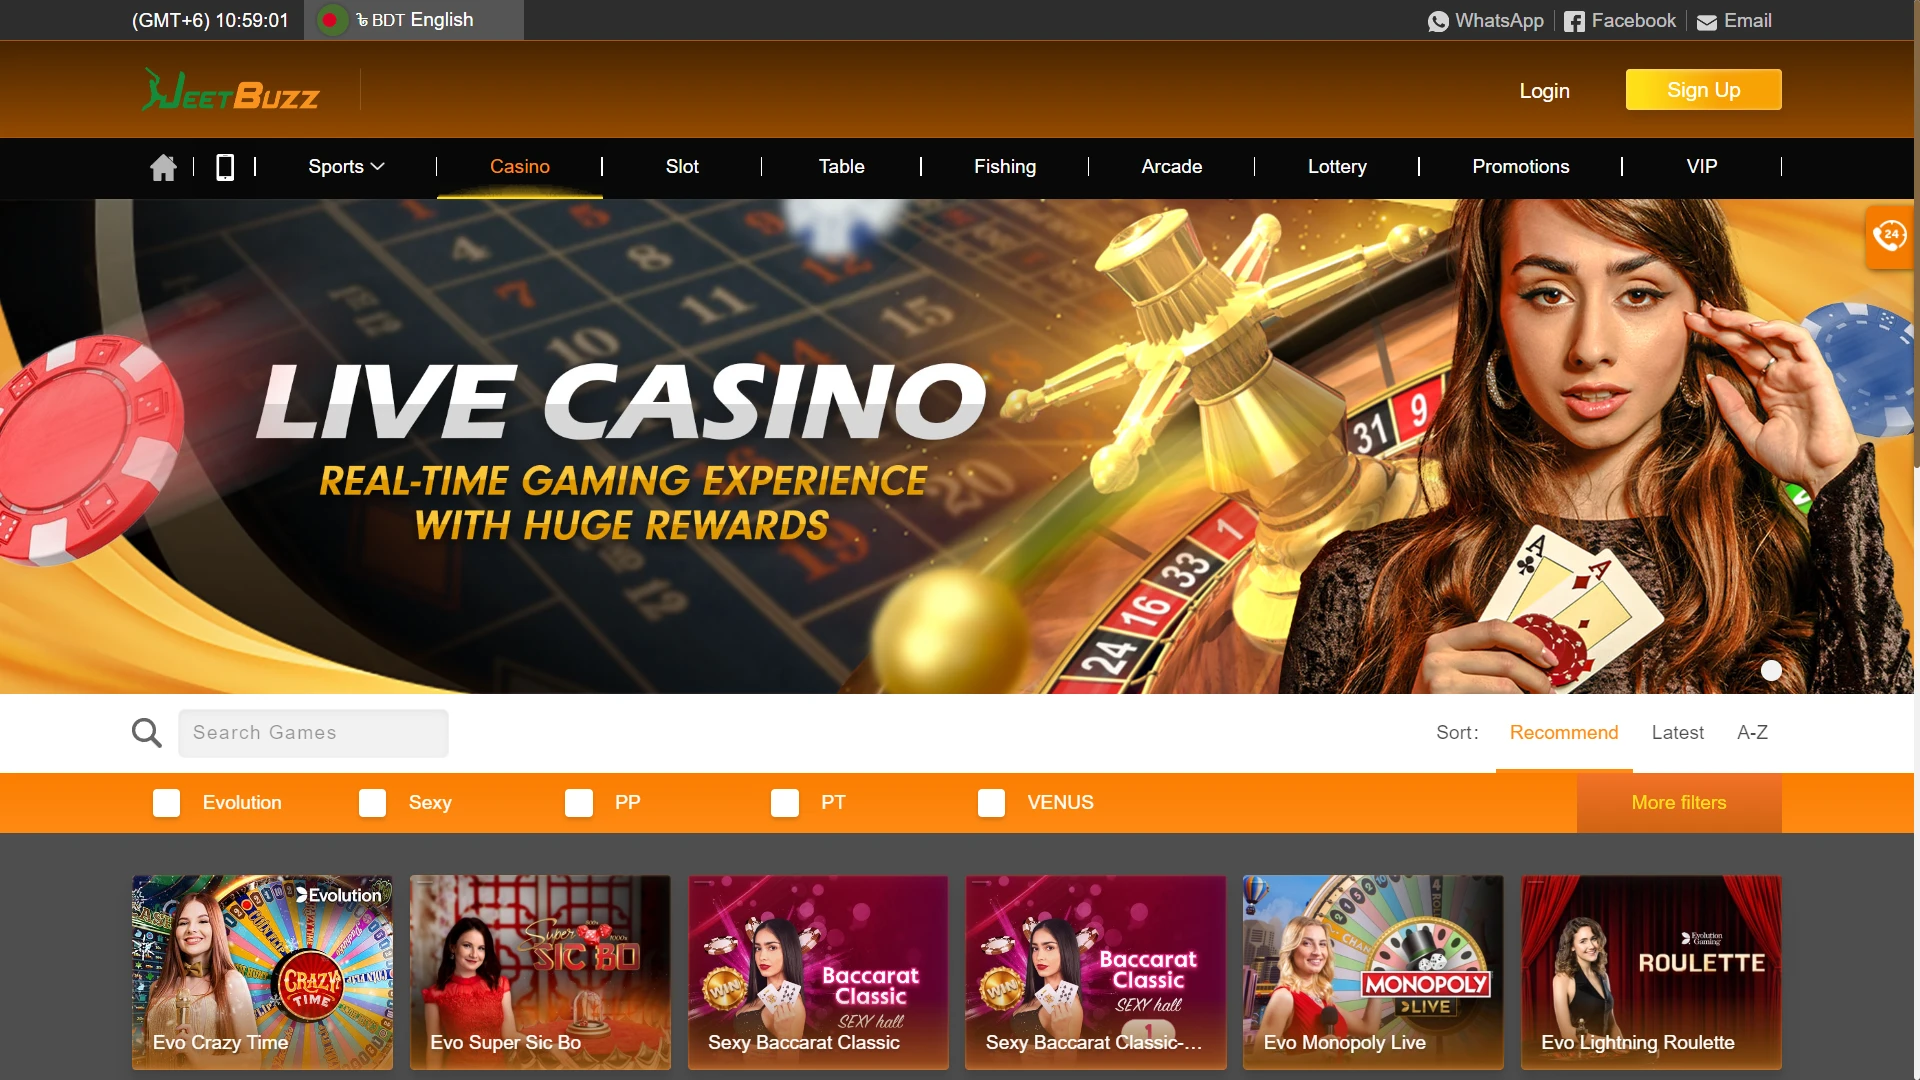 Go to the section with casino games from JeetBuzz.